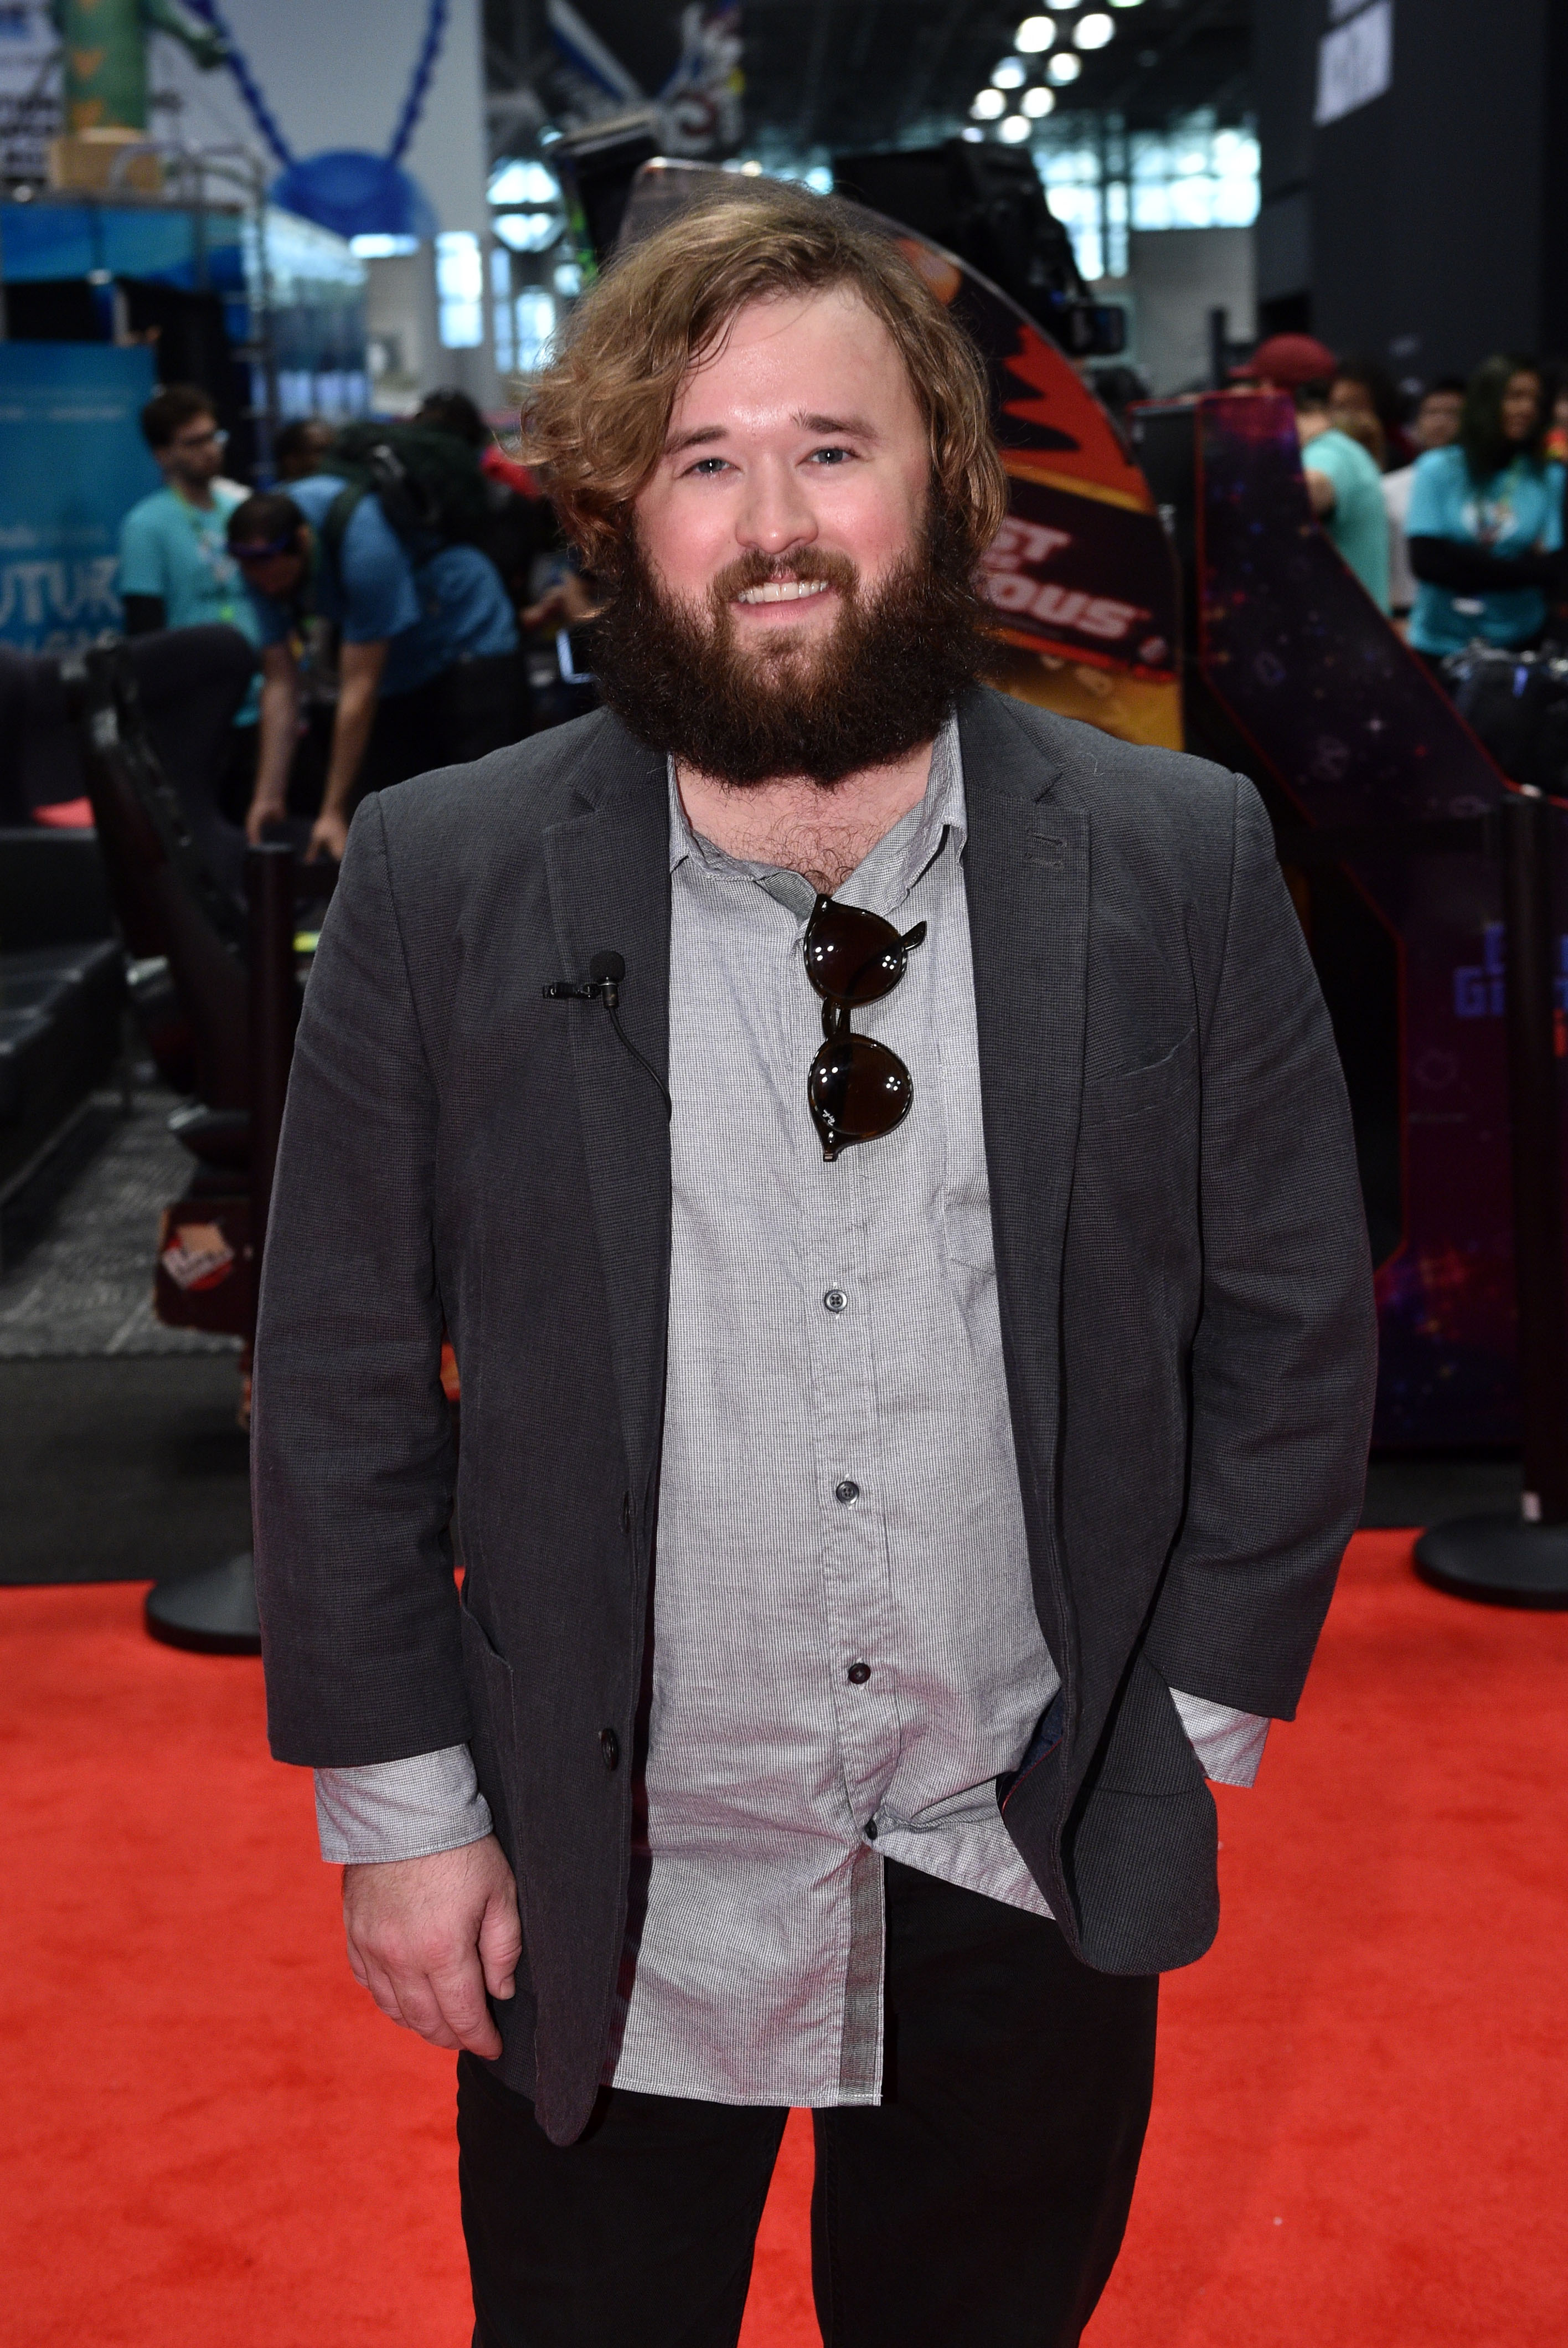 Haley Joel Osment attends the Fandom Fest during New York Comic Con on October 6, 2017 in New York City. | Source: Getty Images